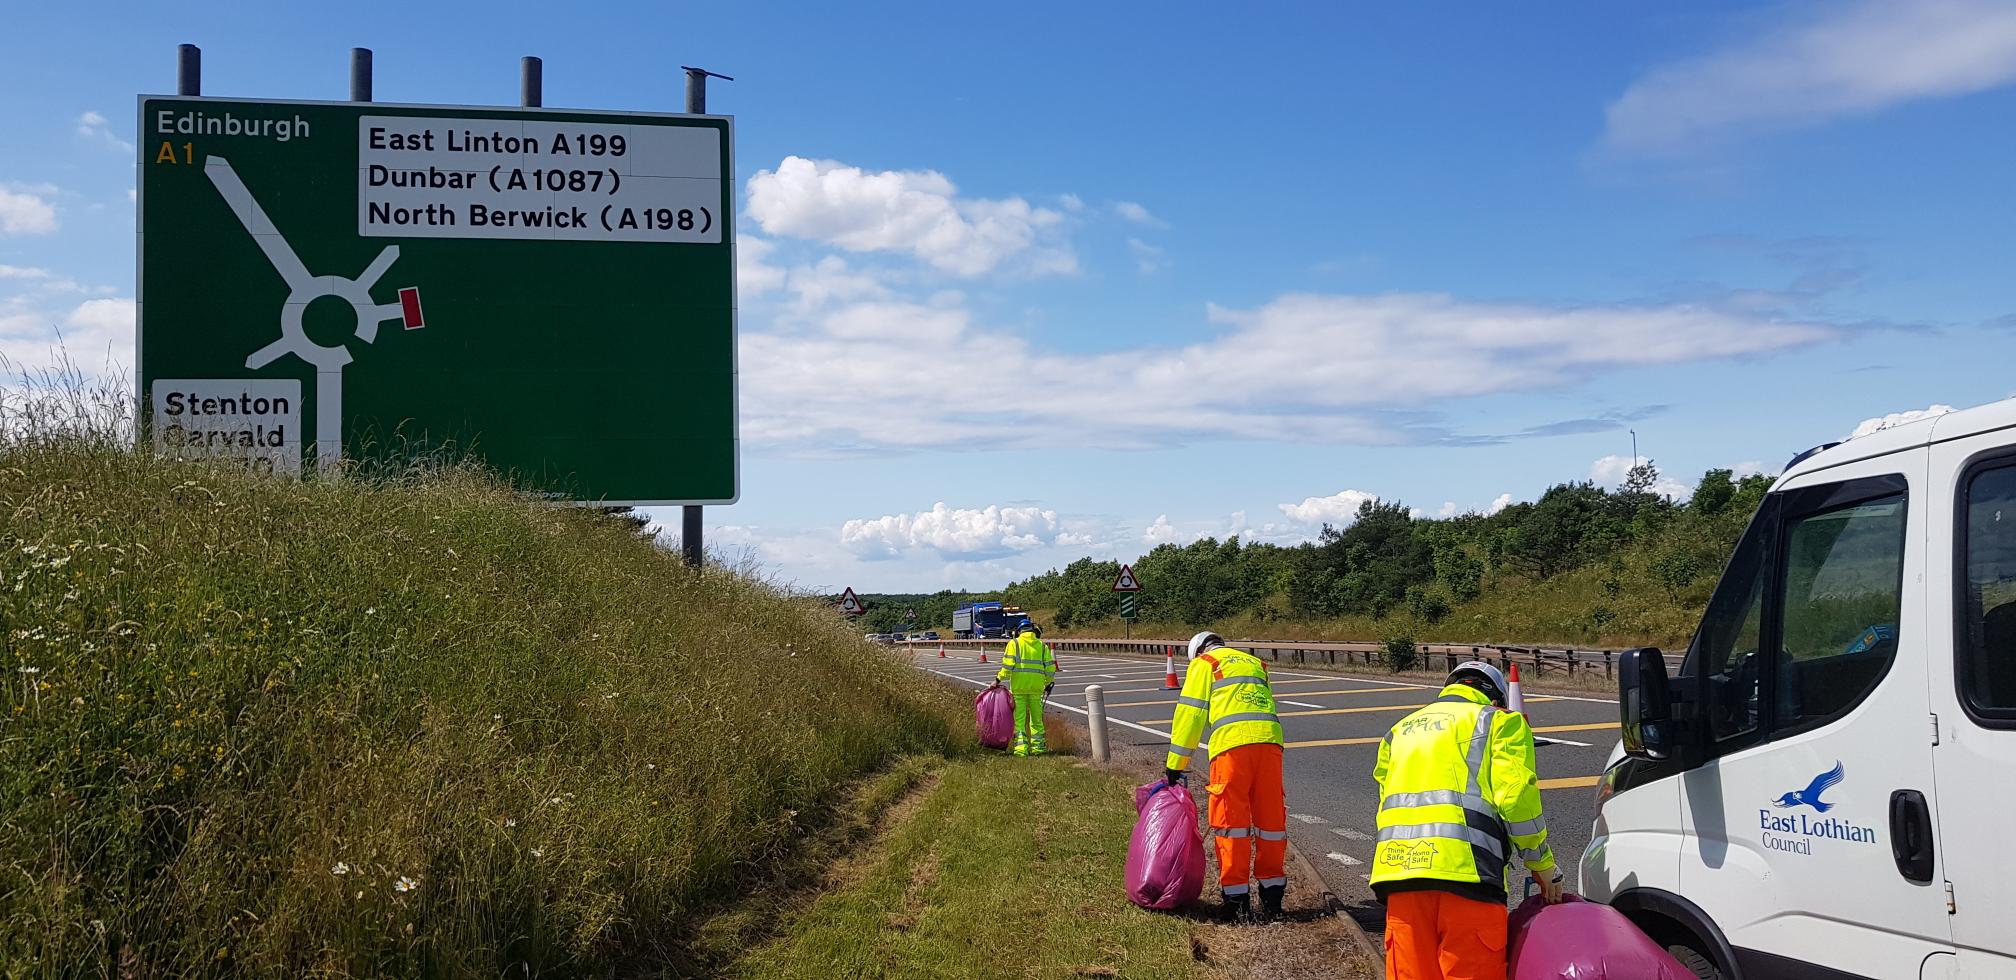 AUTHORITIES JOIN UP TO TACKLE A1 LITTER